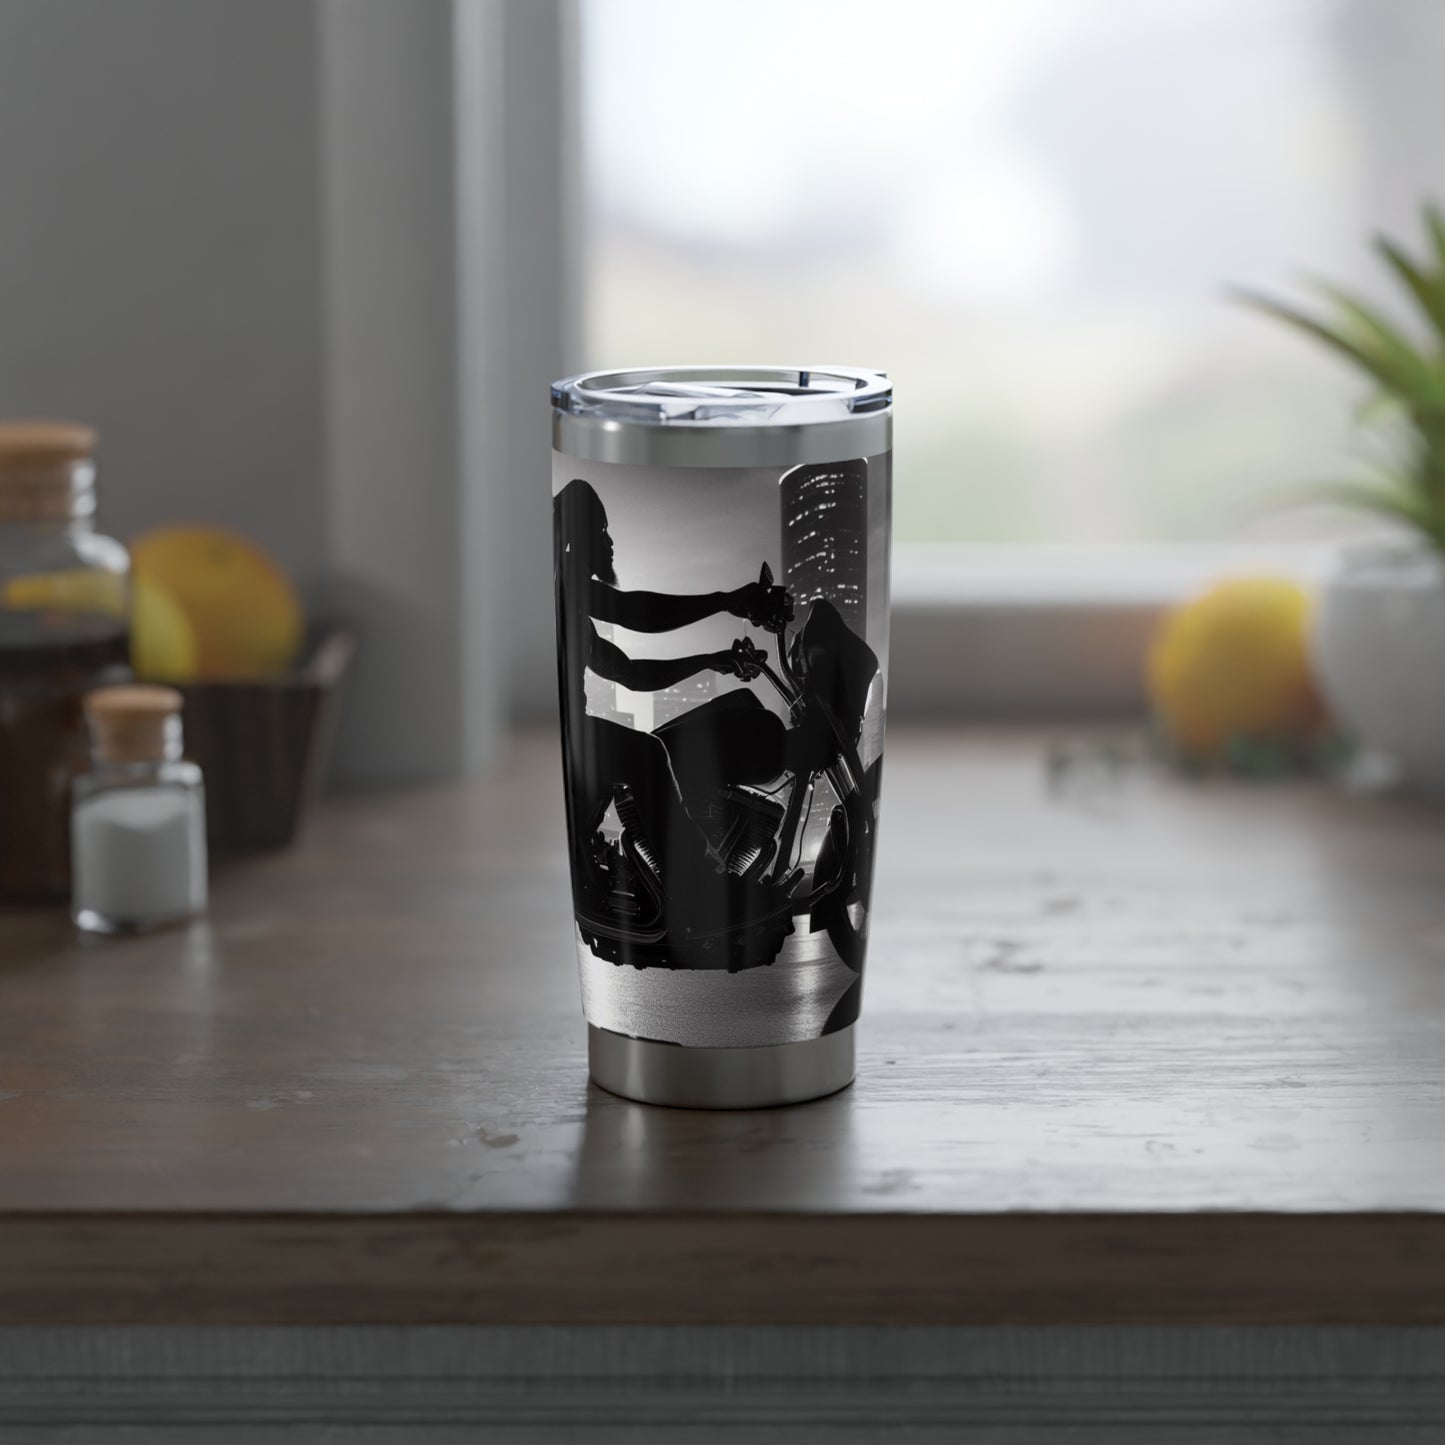 Smoov Dude Night ride in the city Motorcycle 20oz Tumbler